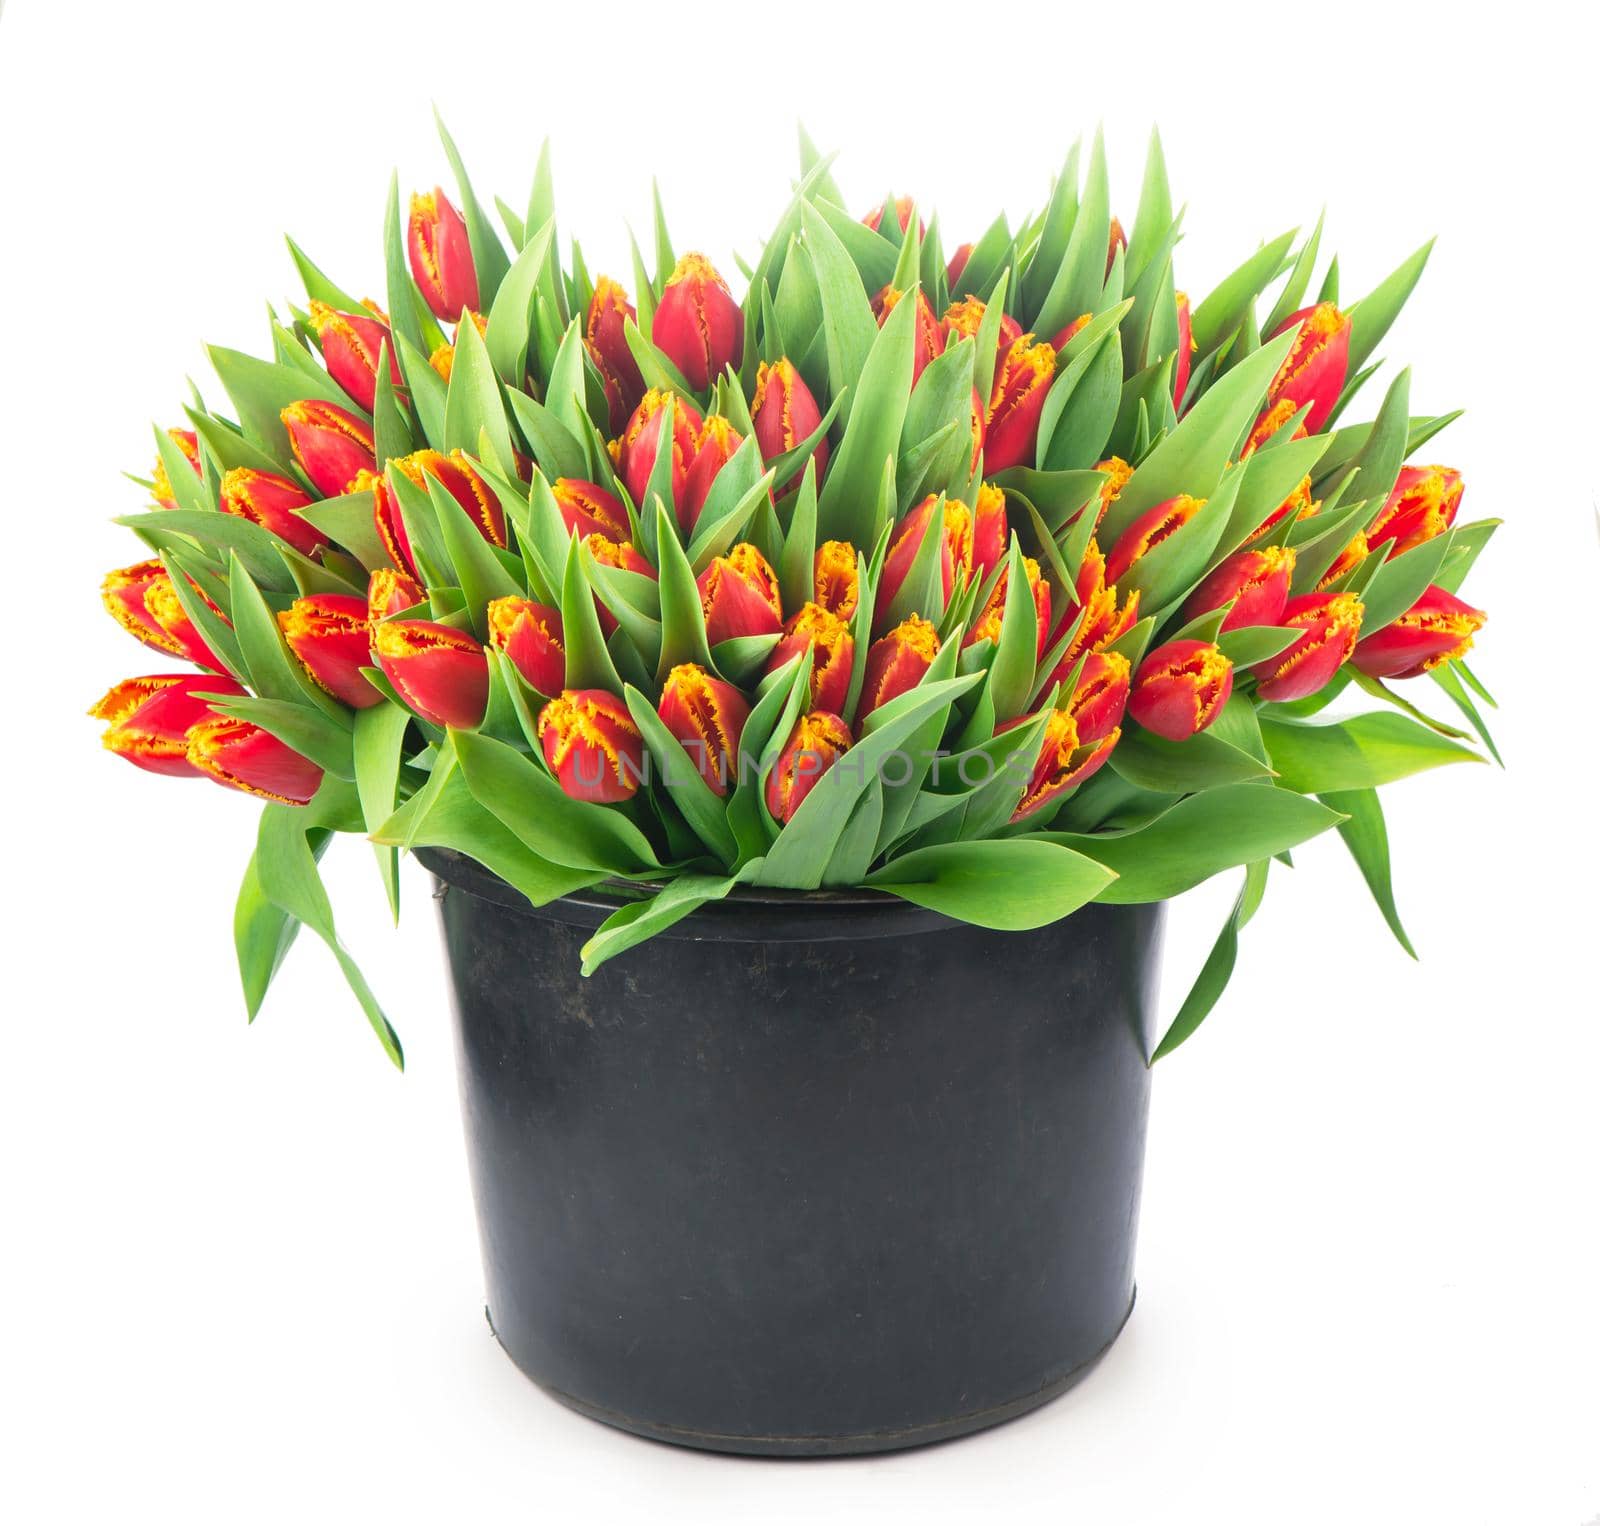 big bouquet of red tulips in a basket on a white background